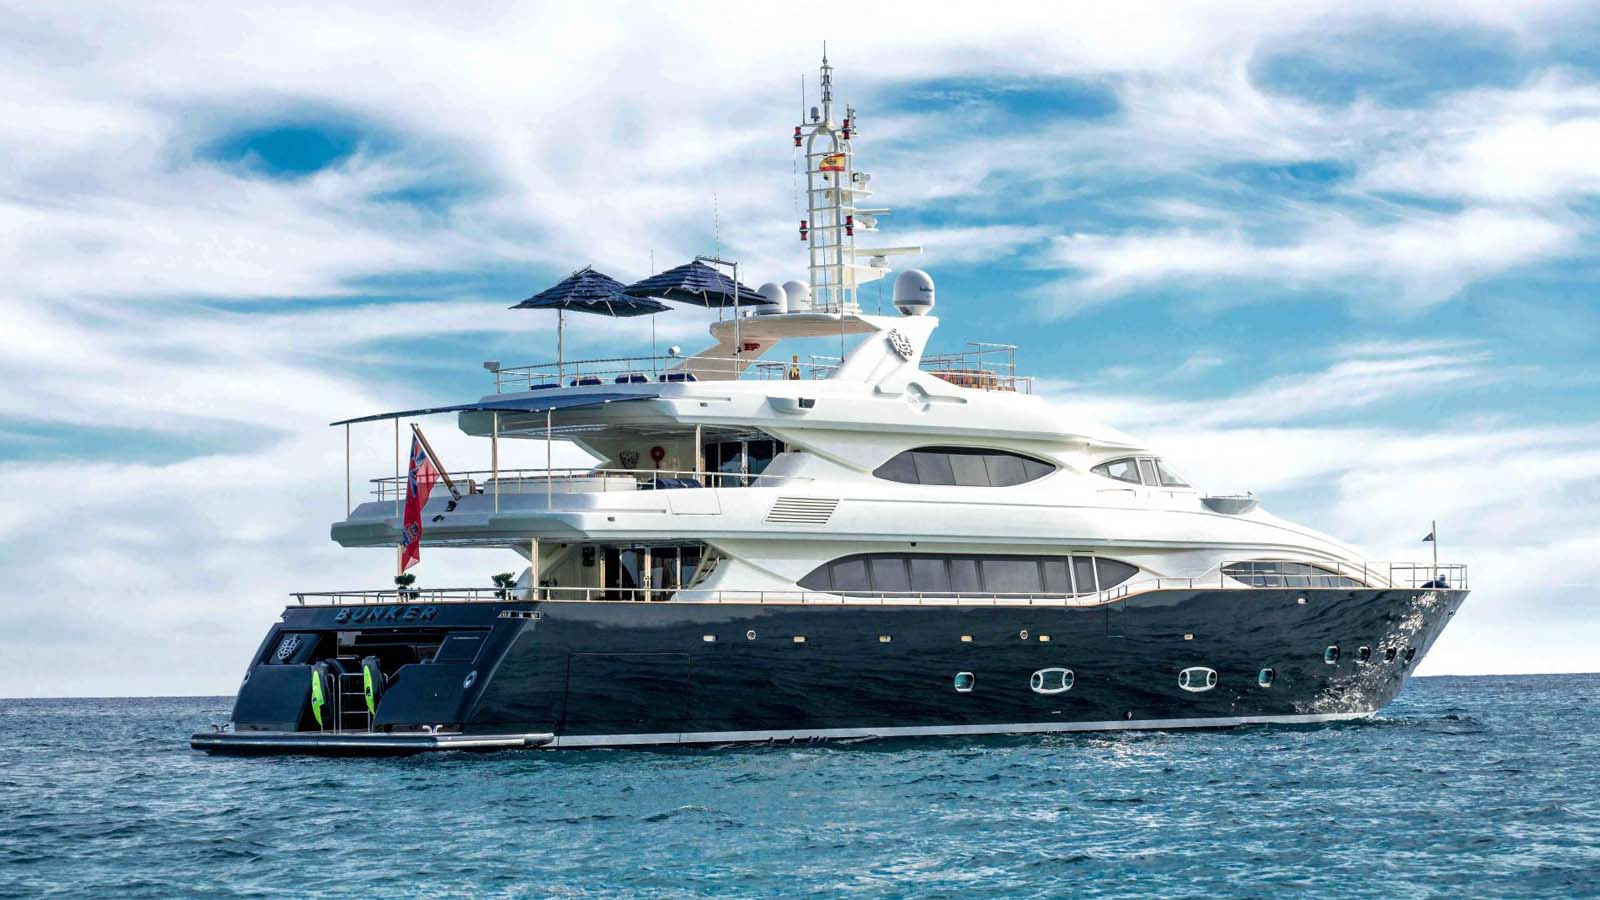 M/Y Bunker - The best 130’ in the sales market. Impeccably maintained